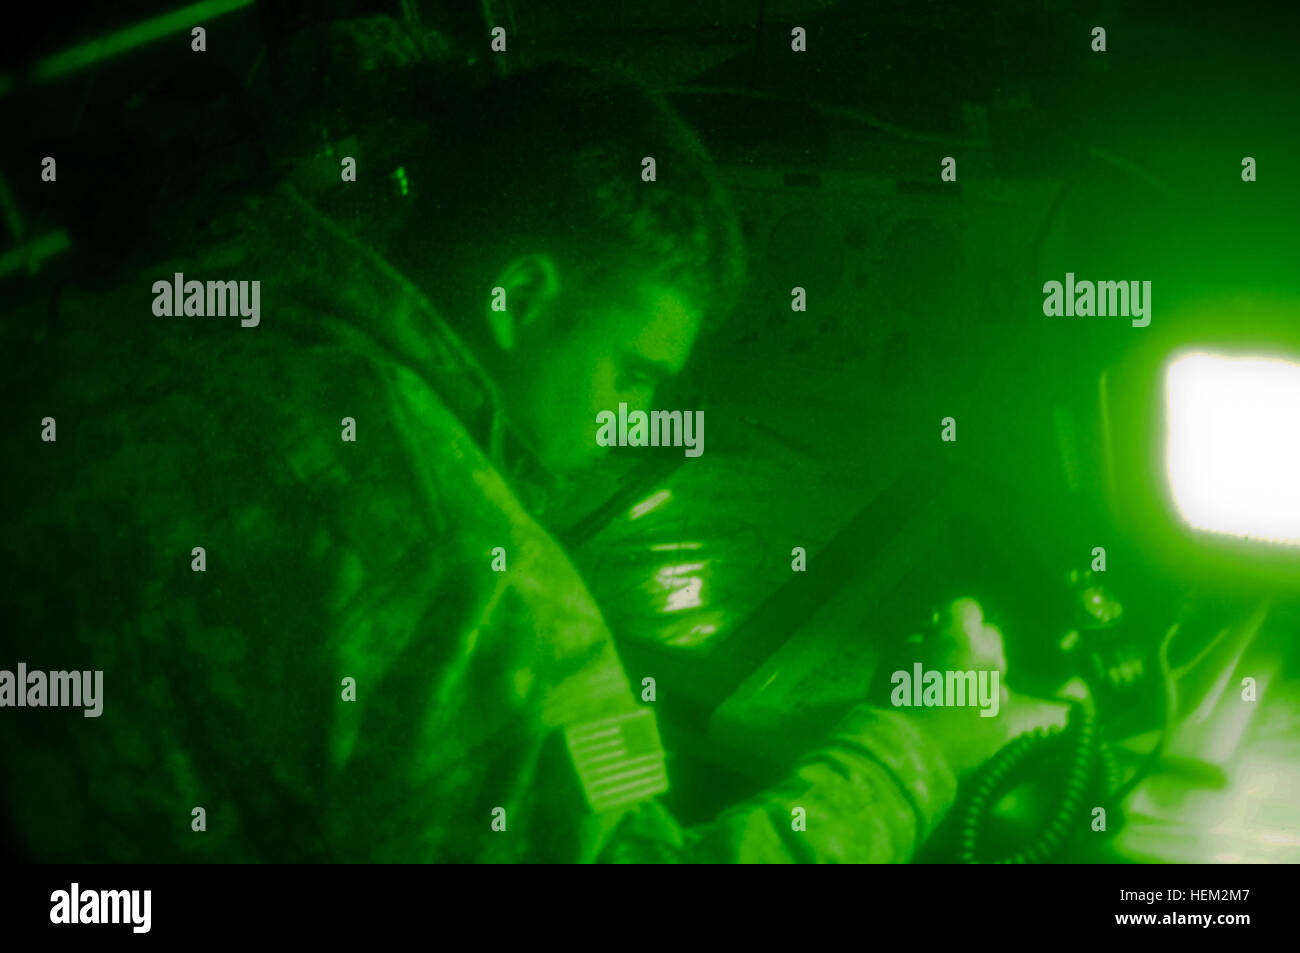 Sgt. Cody Schroeder of La Pine, Ore., an air traffic controller assigned to Task Force Saber, tracks a helicopter on a map, lit only by the display on his radio on Forward Operating Base Miami during TF Saber's February rotation to the National Training Center at Fort Irwin, Calif. Army air traffic controller 536211 Stock Photo